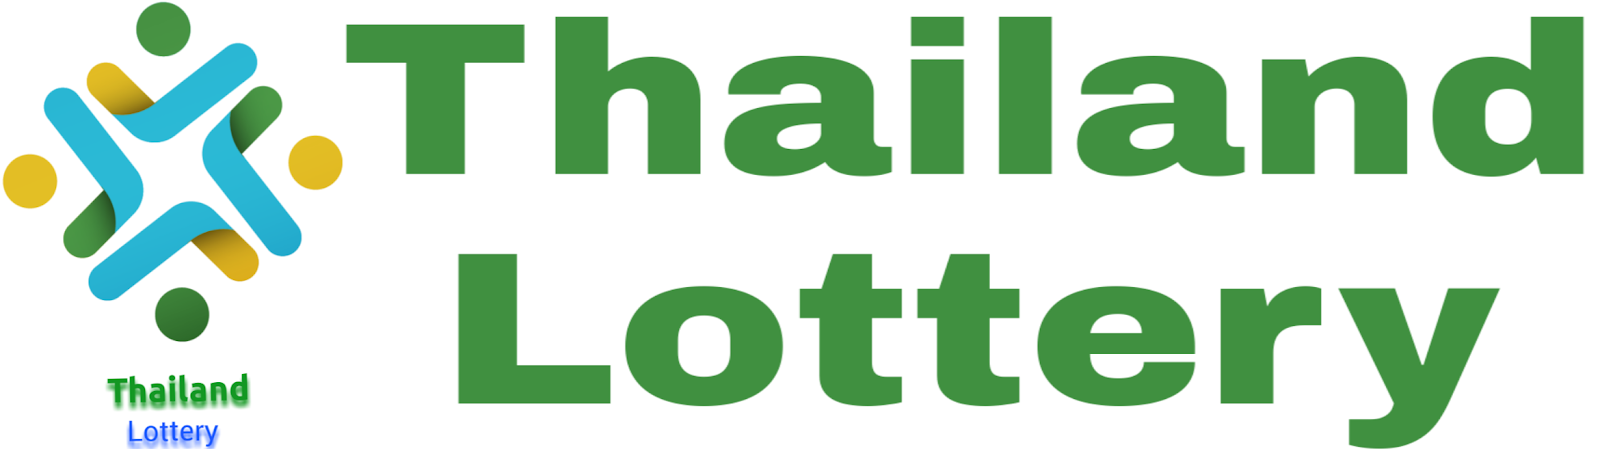 Thai Lotto Thailand Lottery Result